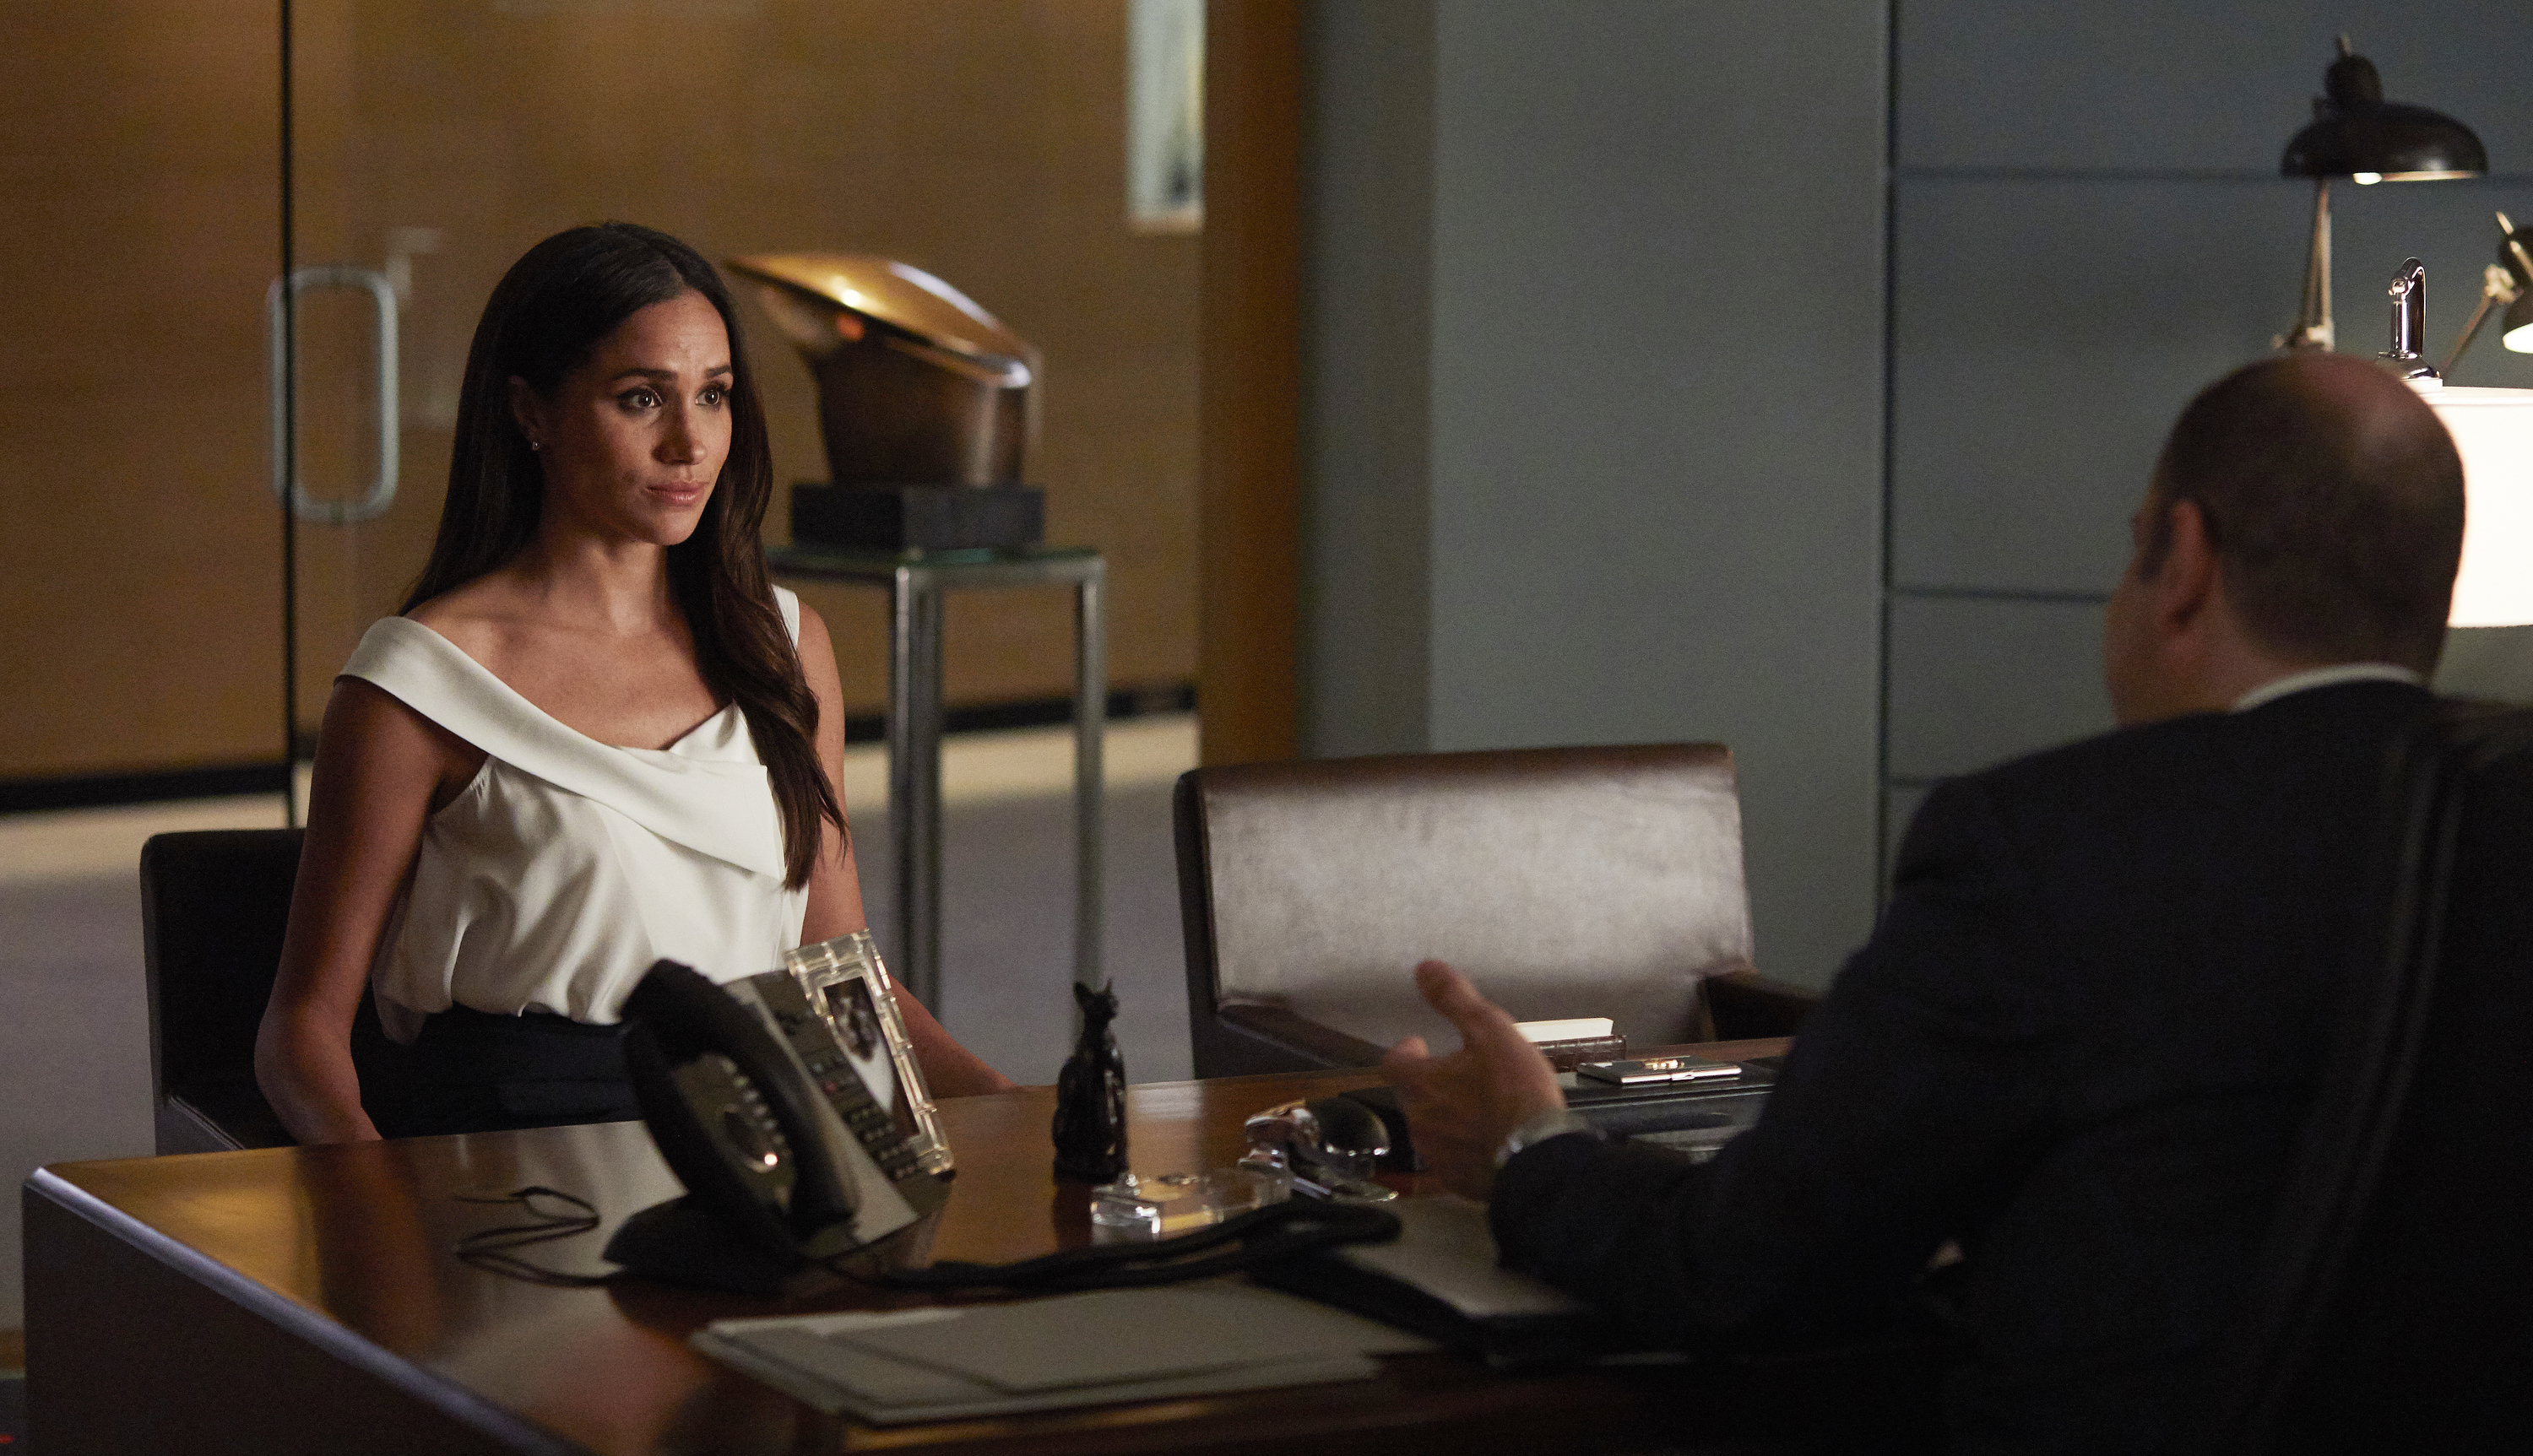 Meghan Markle as Rachel Zane and Rick Hoffman as Louis Litt on "Suits" on June 7, 2017. | Source: Getty Images